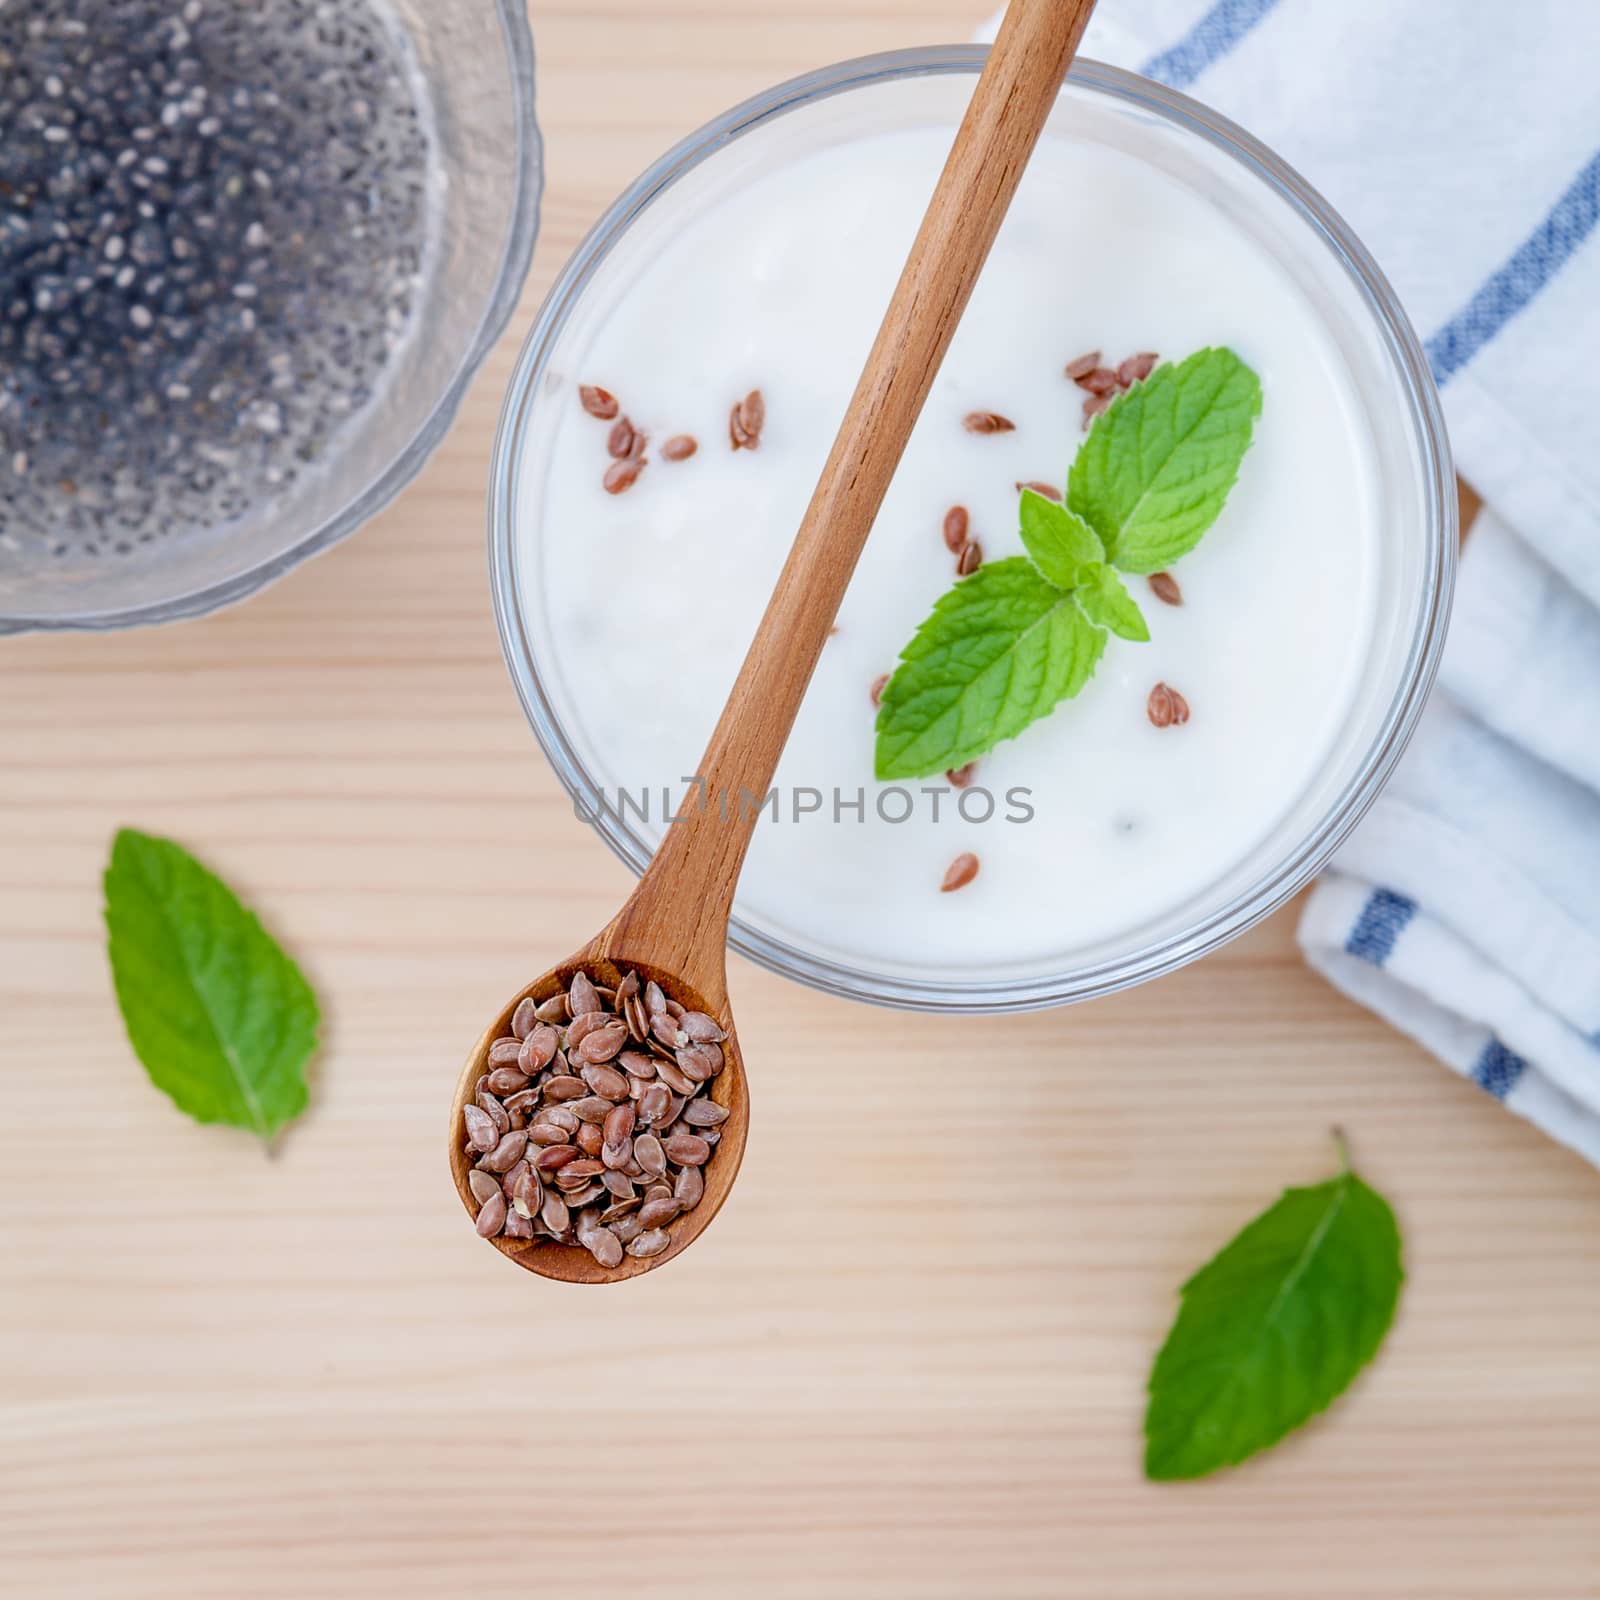 Nutritious flax seeds with glass of greek yogurt and wooden spoon for diet  meal setup on wooden background . shallow depth of field.